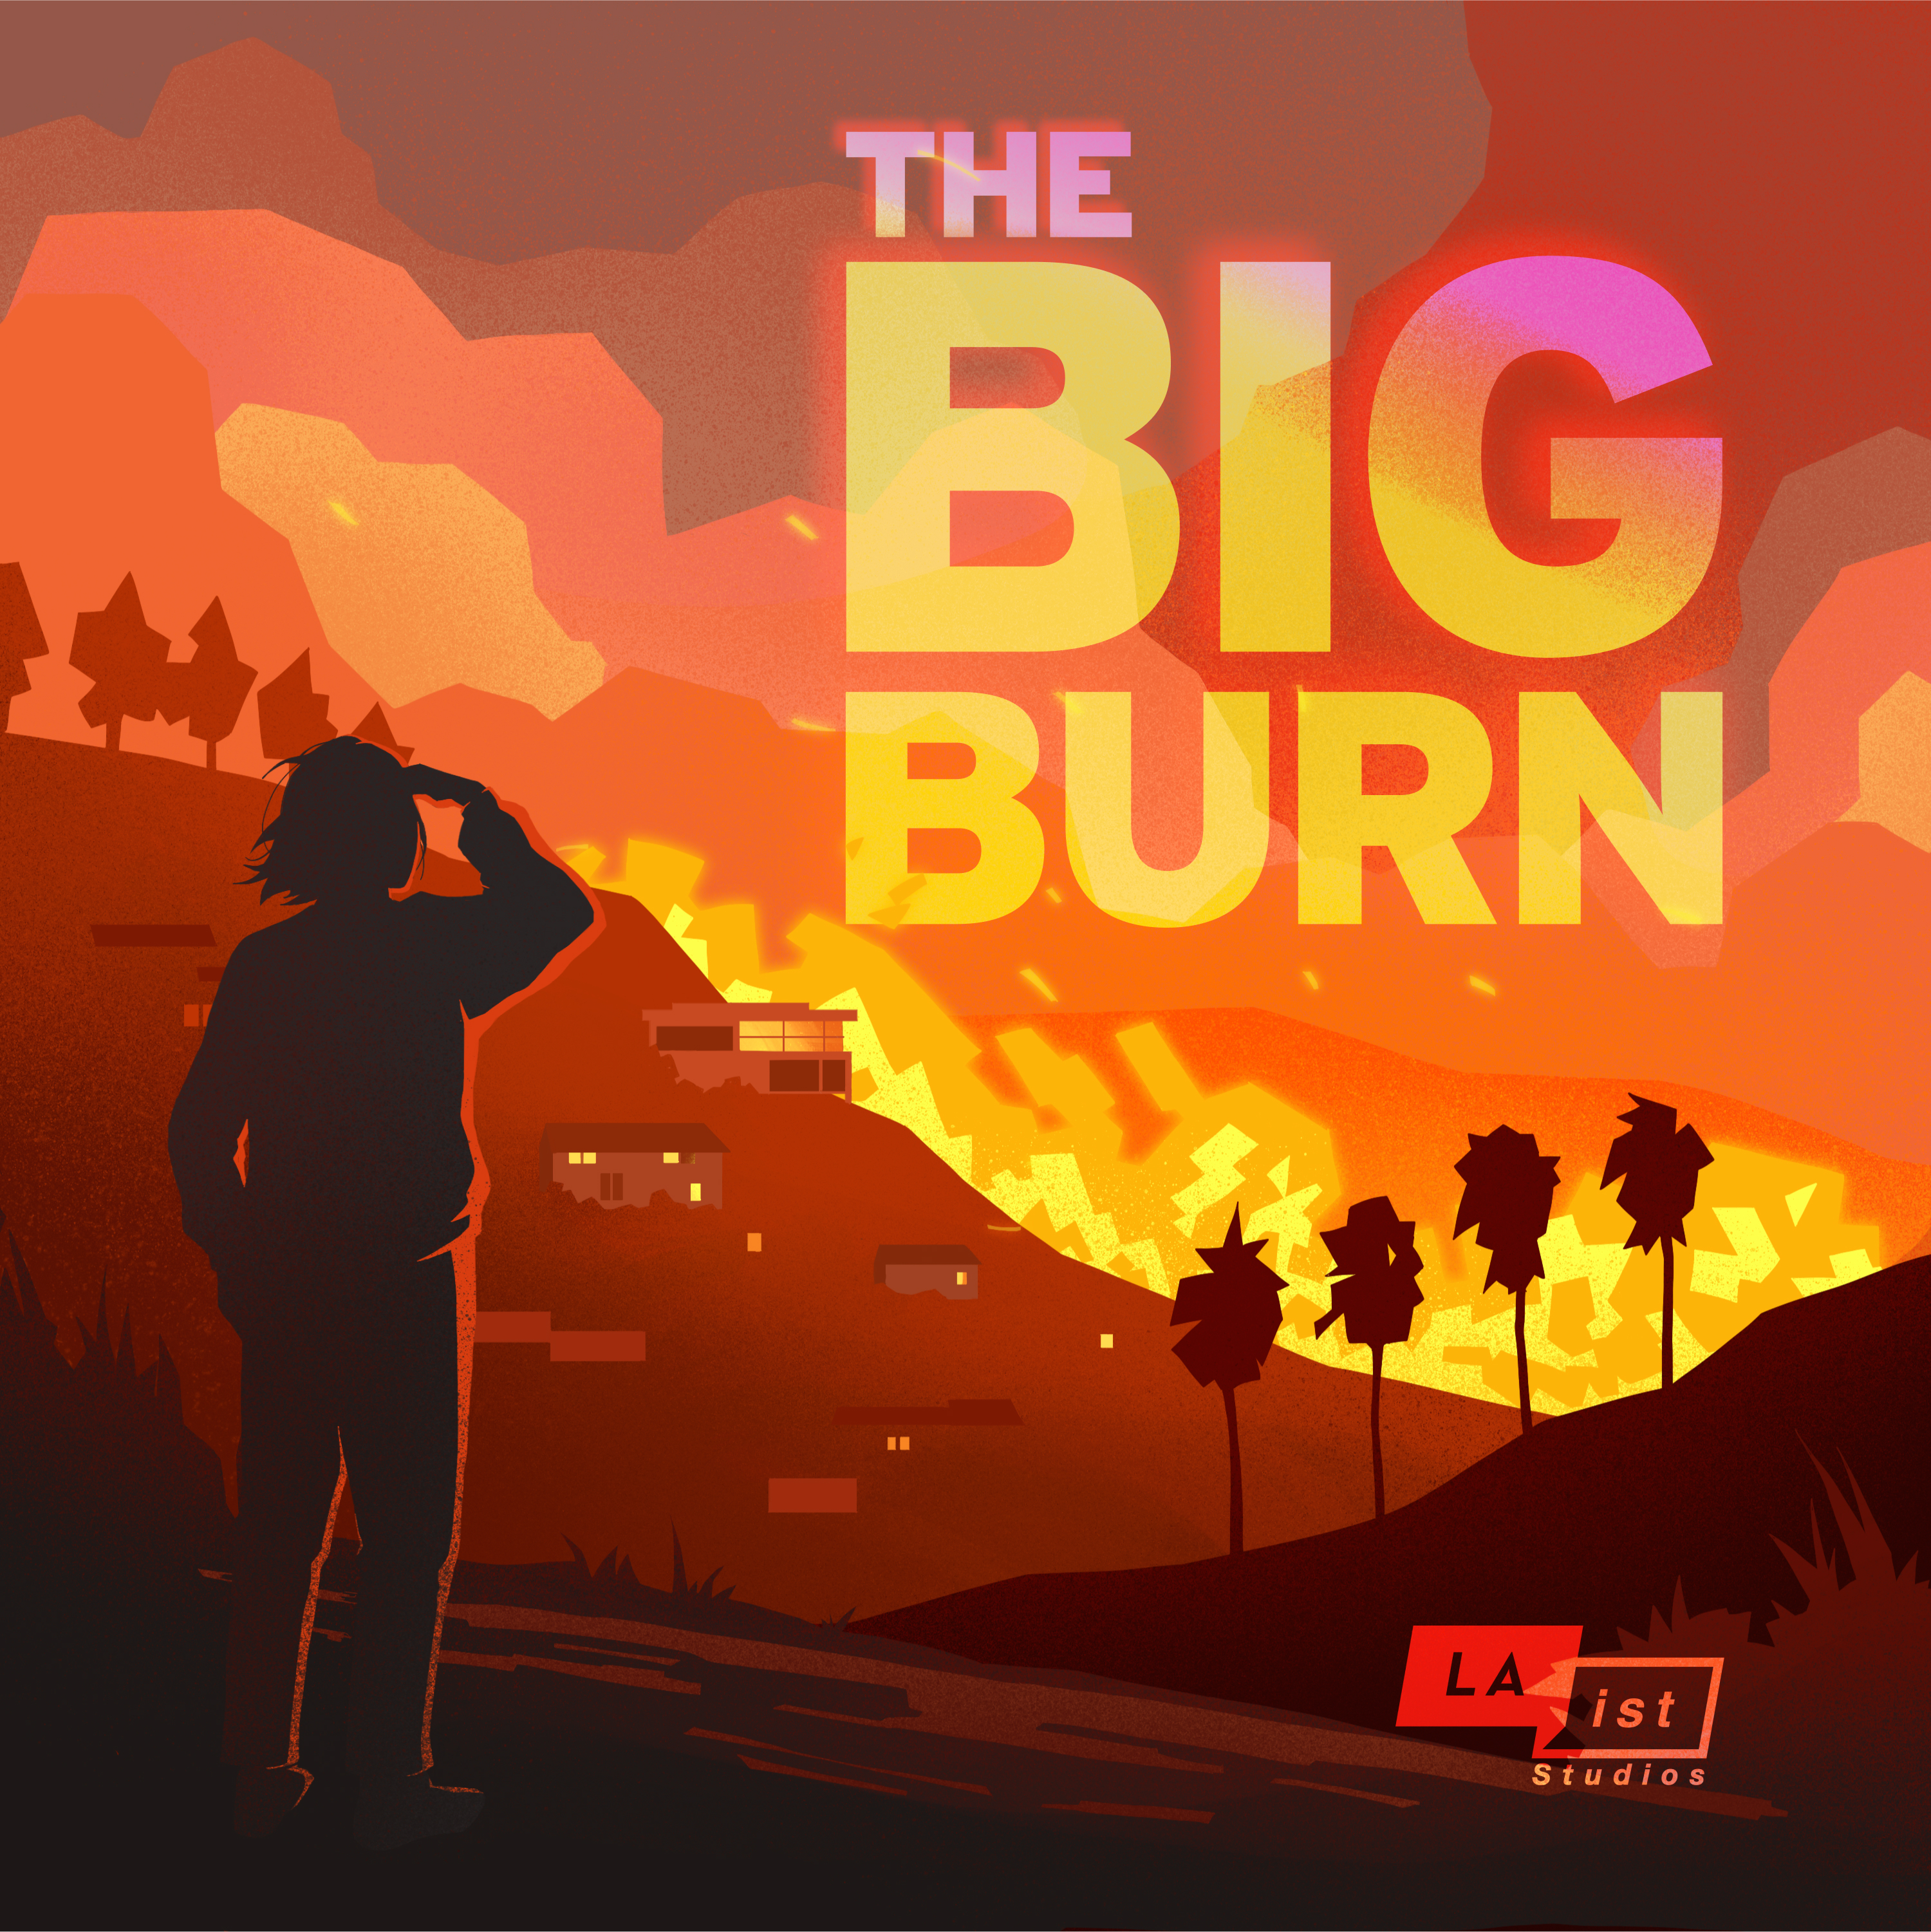 The Big Disaster: The Big Burn podcast show image